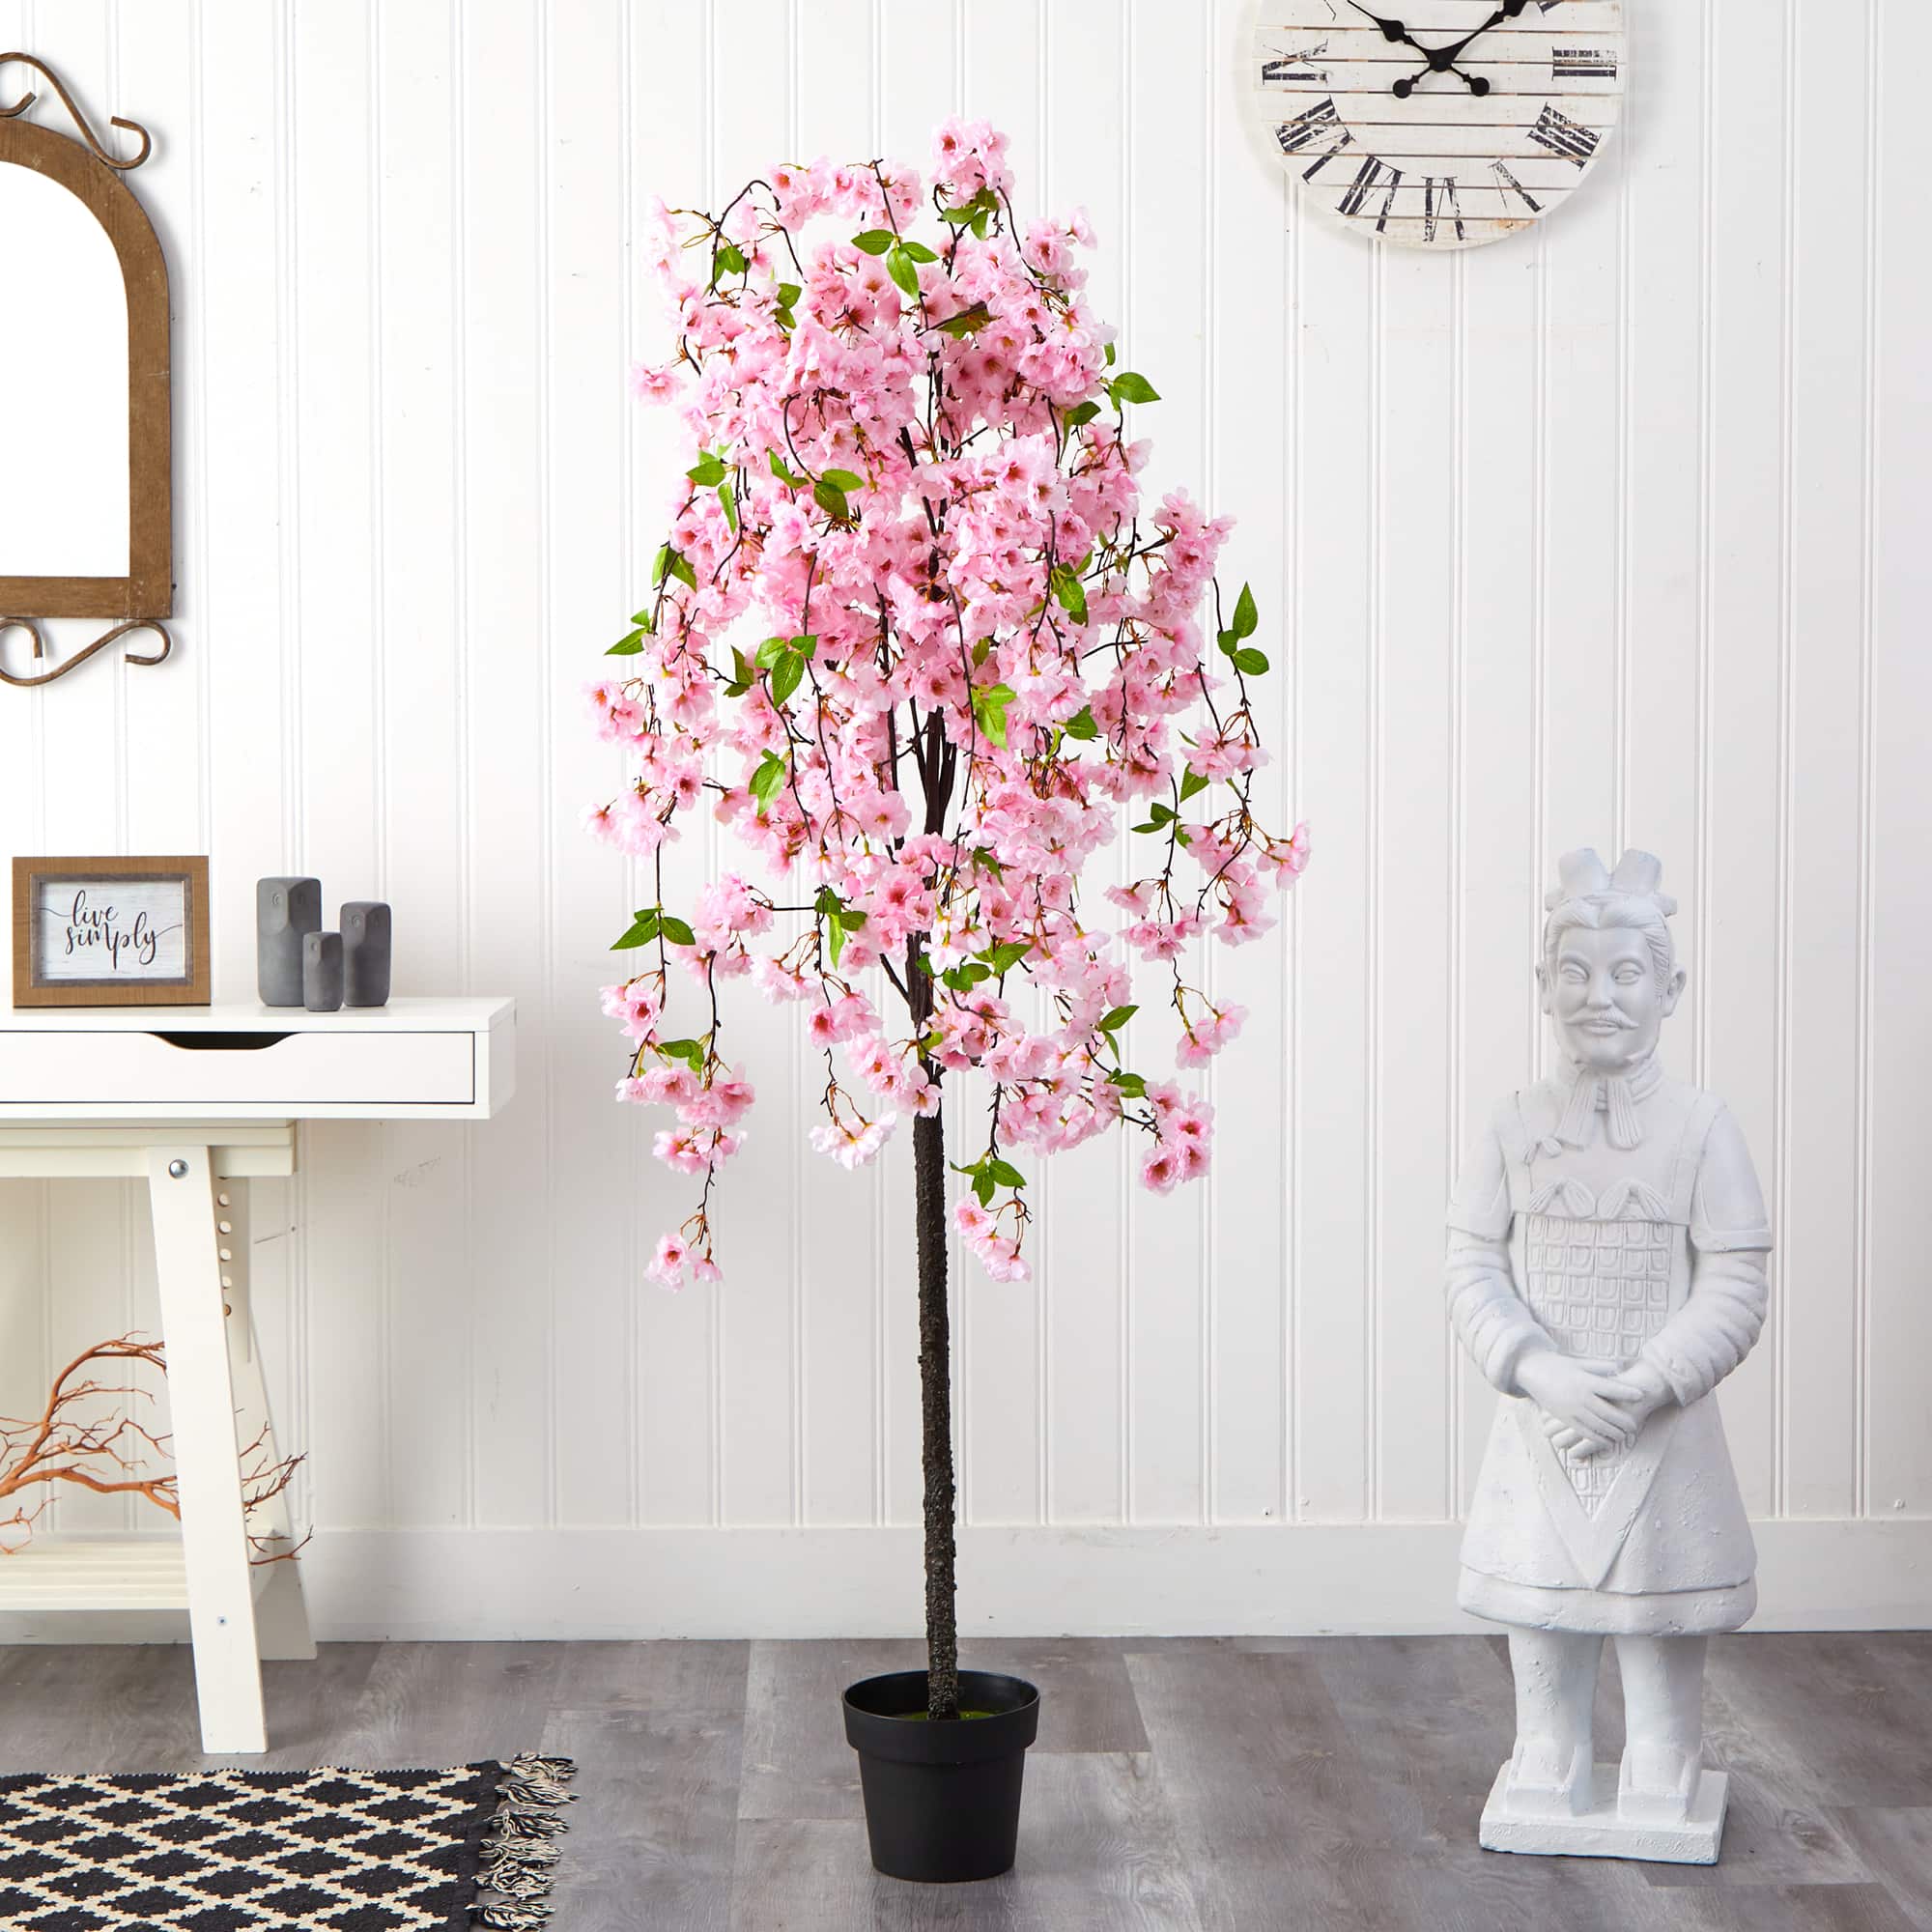 5ft. Potted Cherry Blossom Tree | Michaels